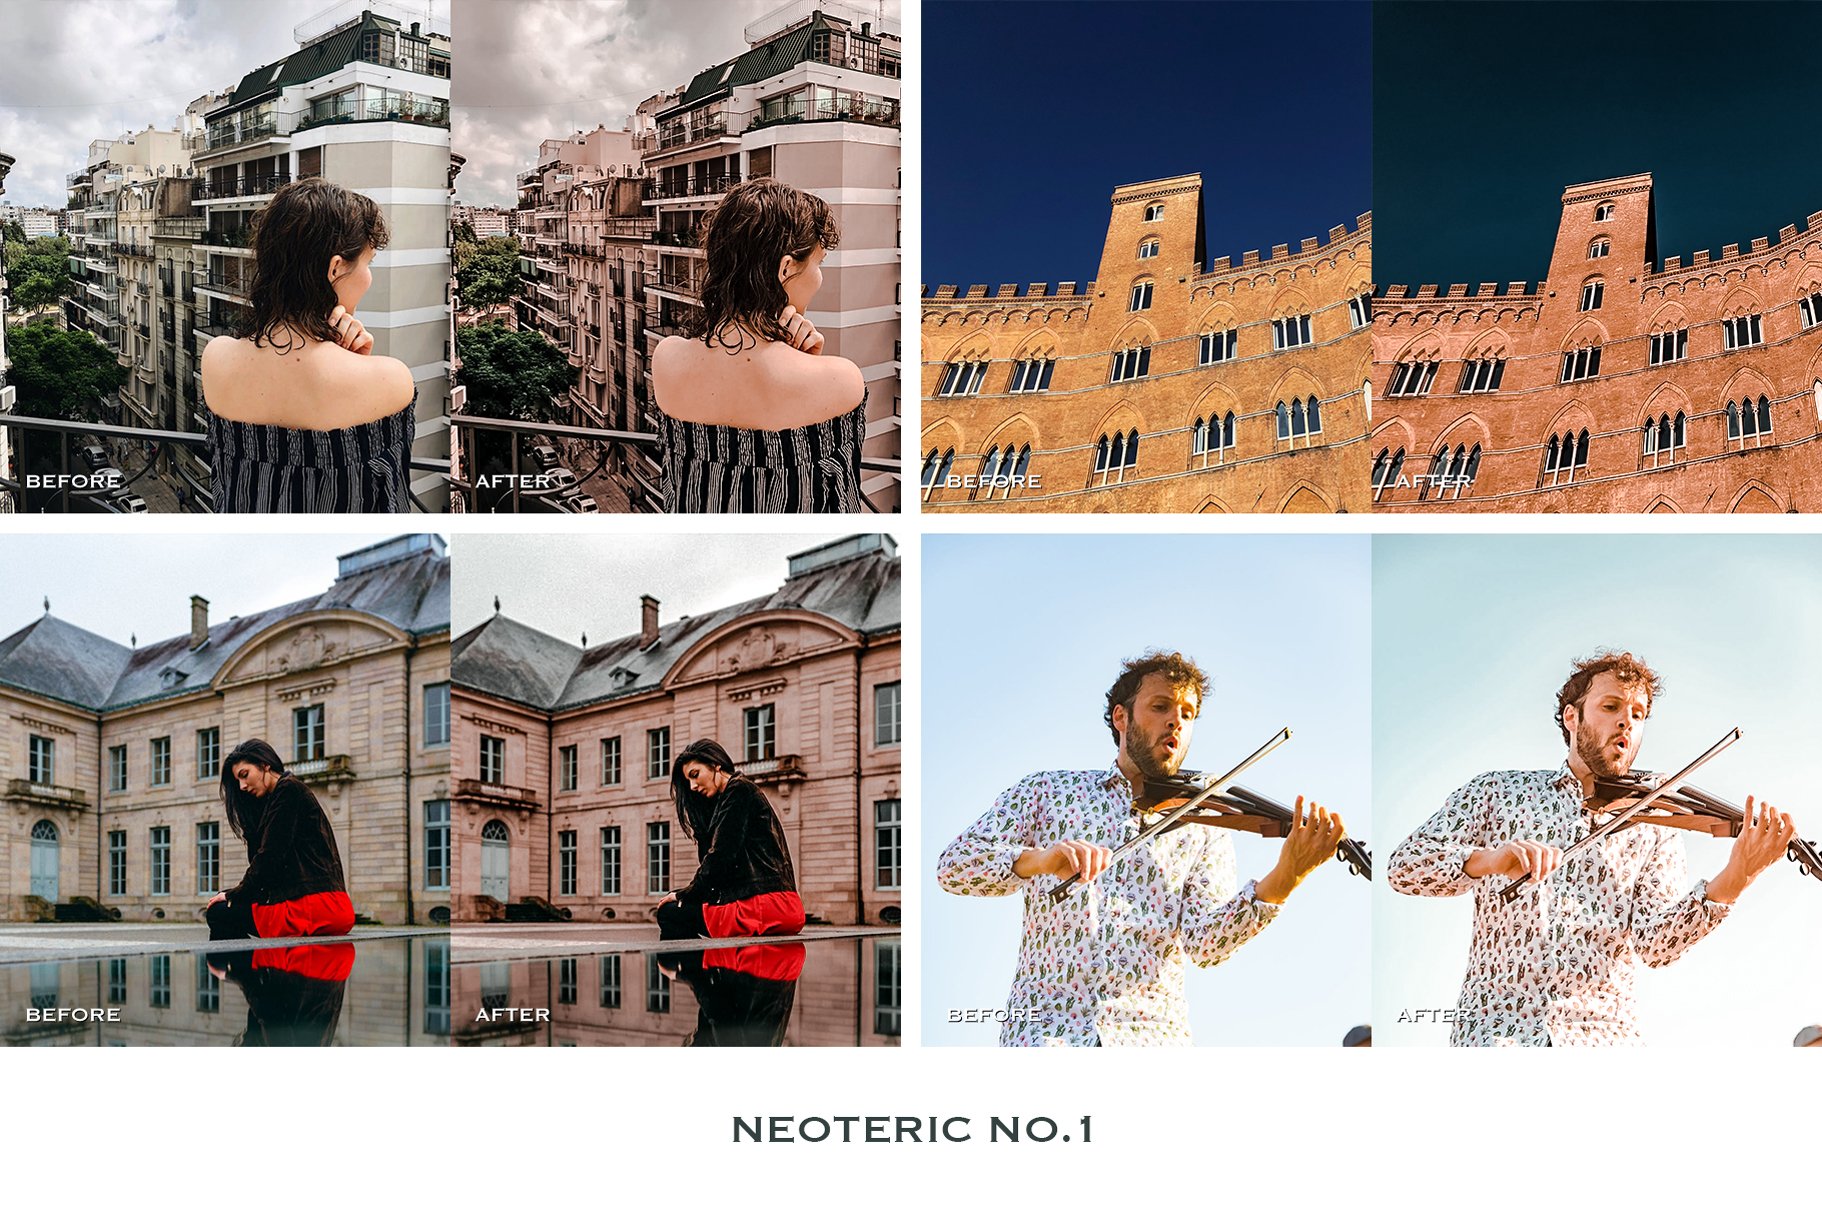 neoteric no.1 182